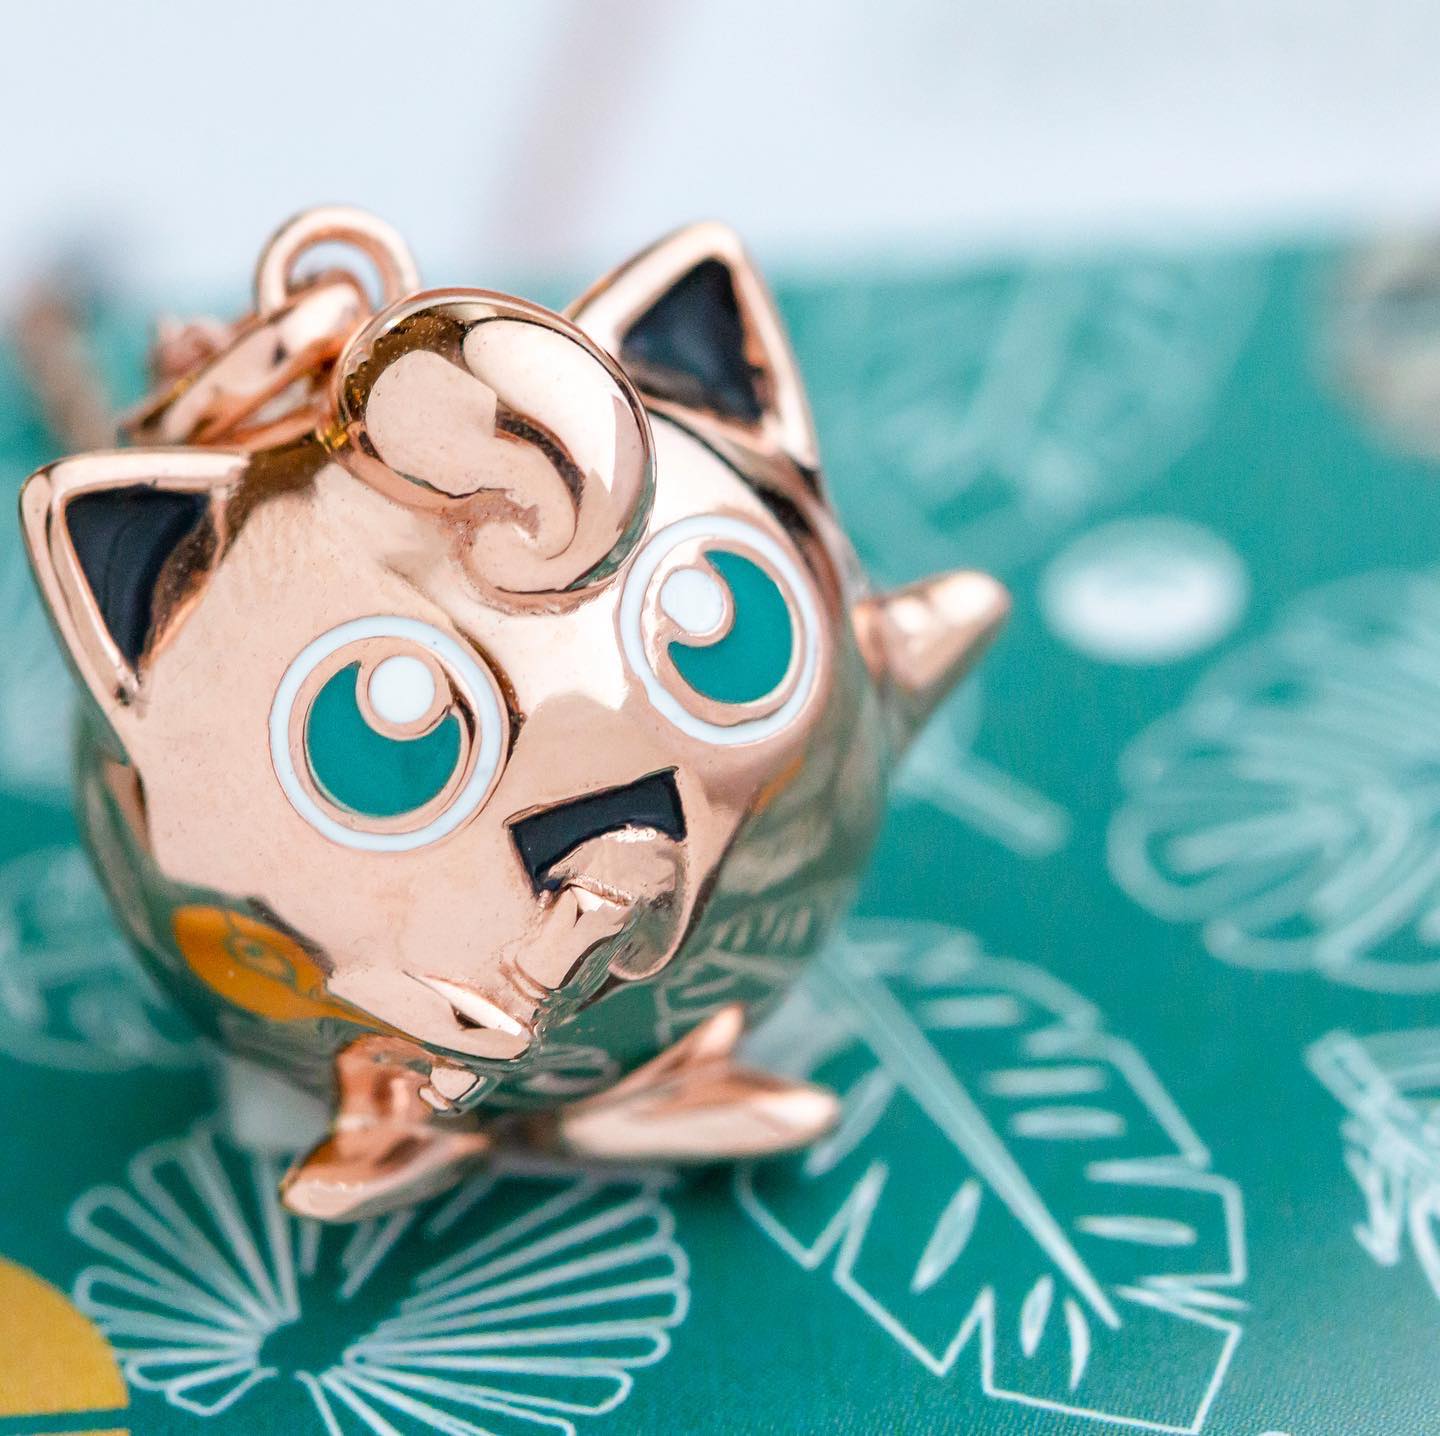 RockLove x Pokemon jewelry series expands with new items | The